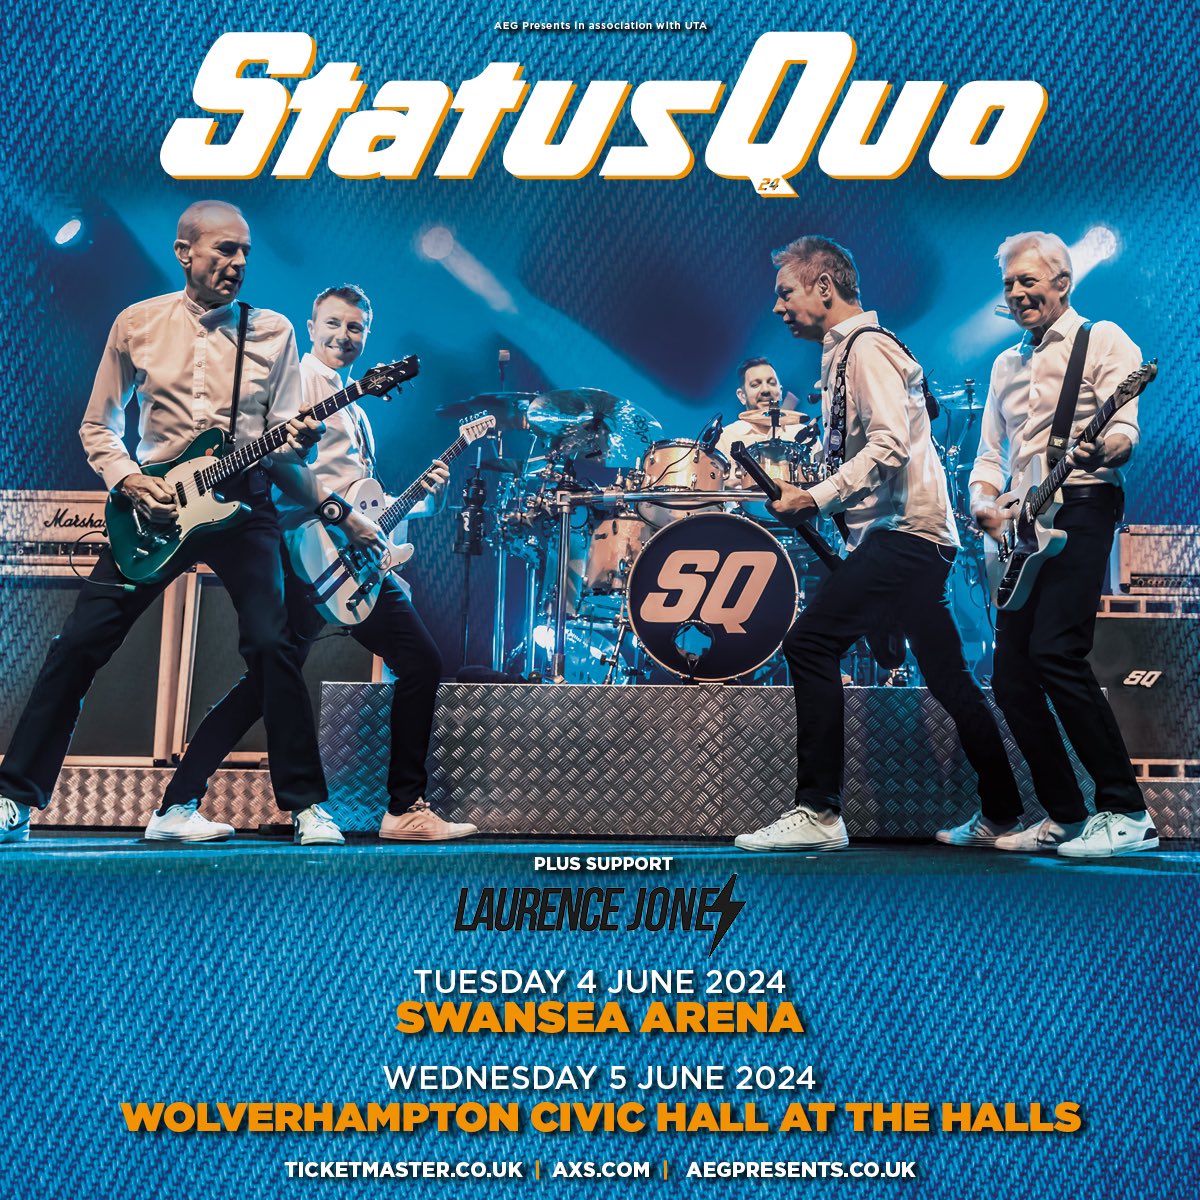 BIG NEWS! I’m so excited to announce I’m supporting Status Quo at two more EPIC venues around The UK in June. Swansea Arena & The Halls Wolverhampton. #statusquo This is going to be AMAZING! A dream come true for me personally. HERE WE GO… ROCKING ALL OVER THE WORLD! LJ